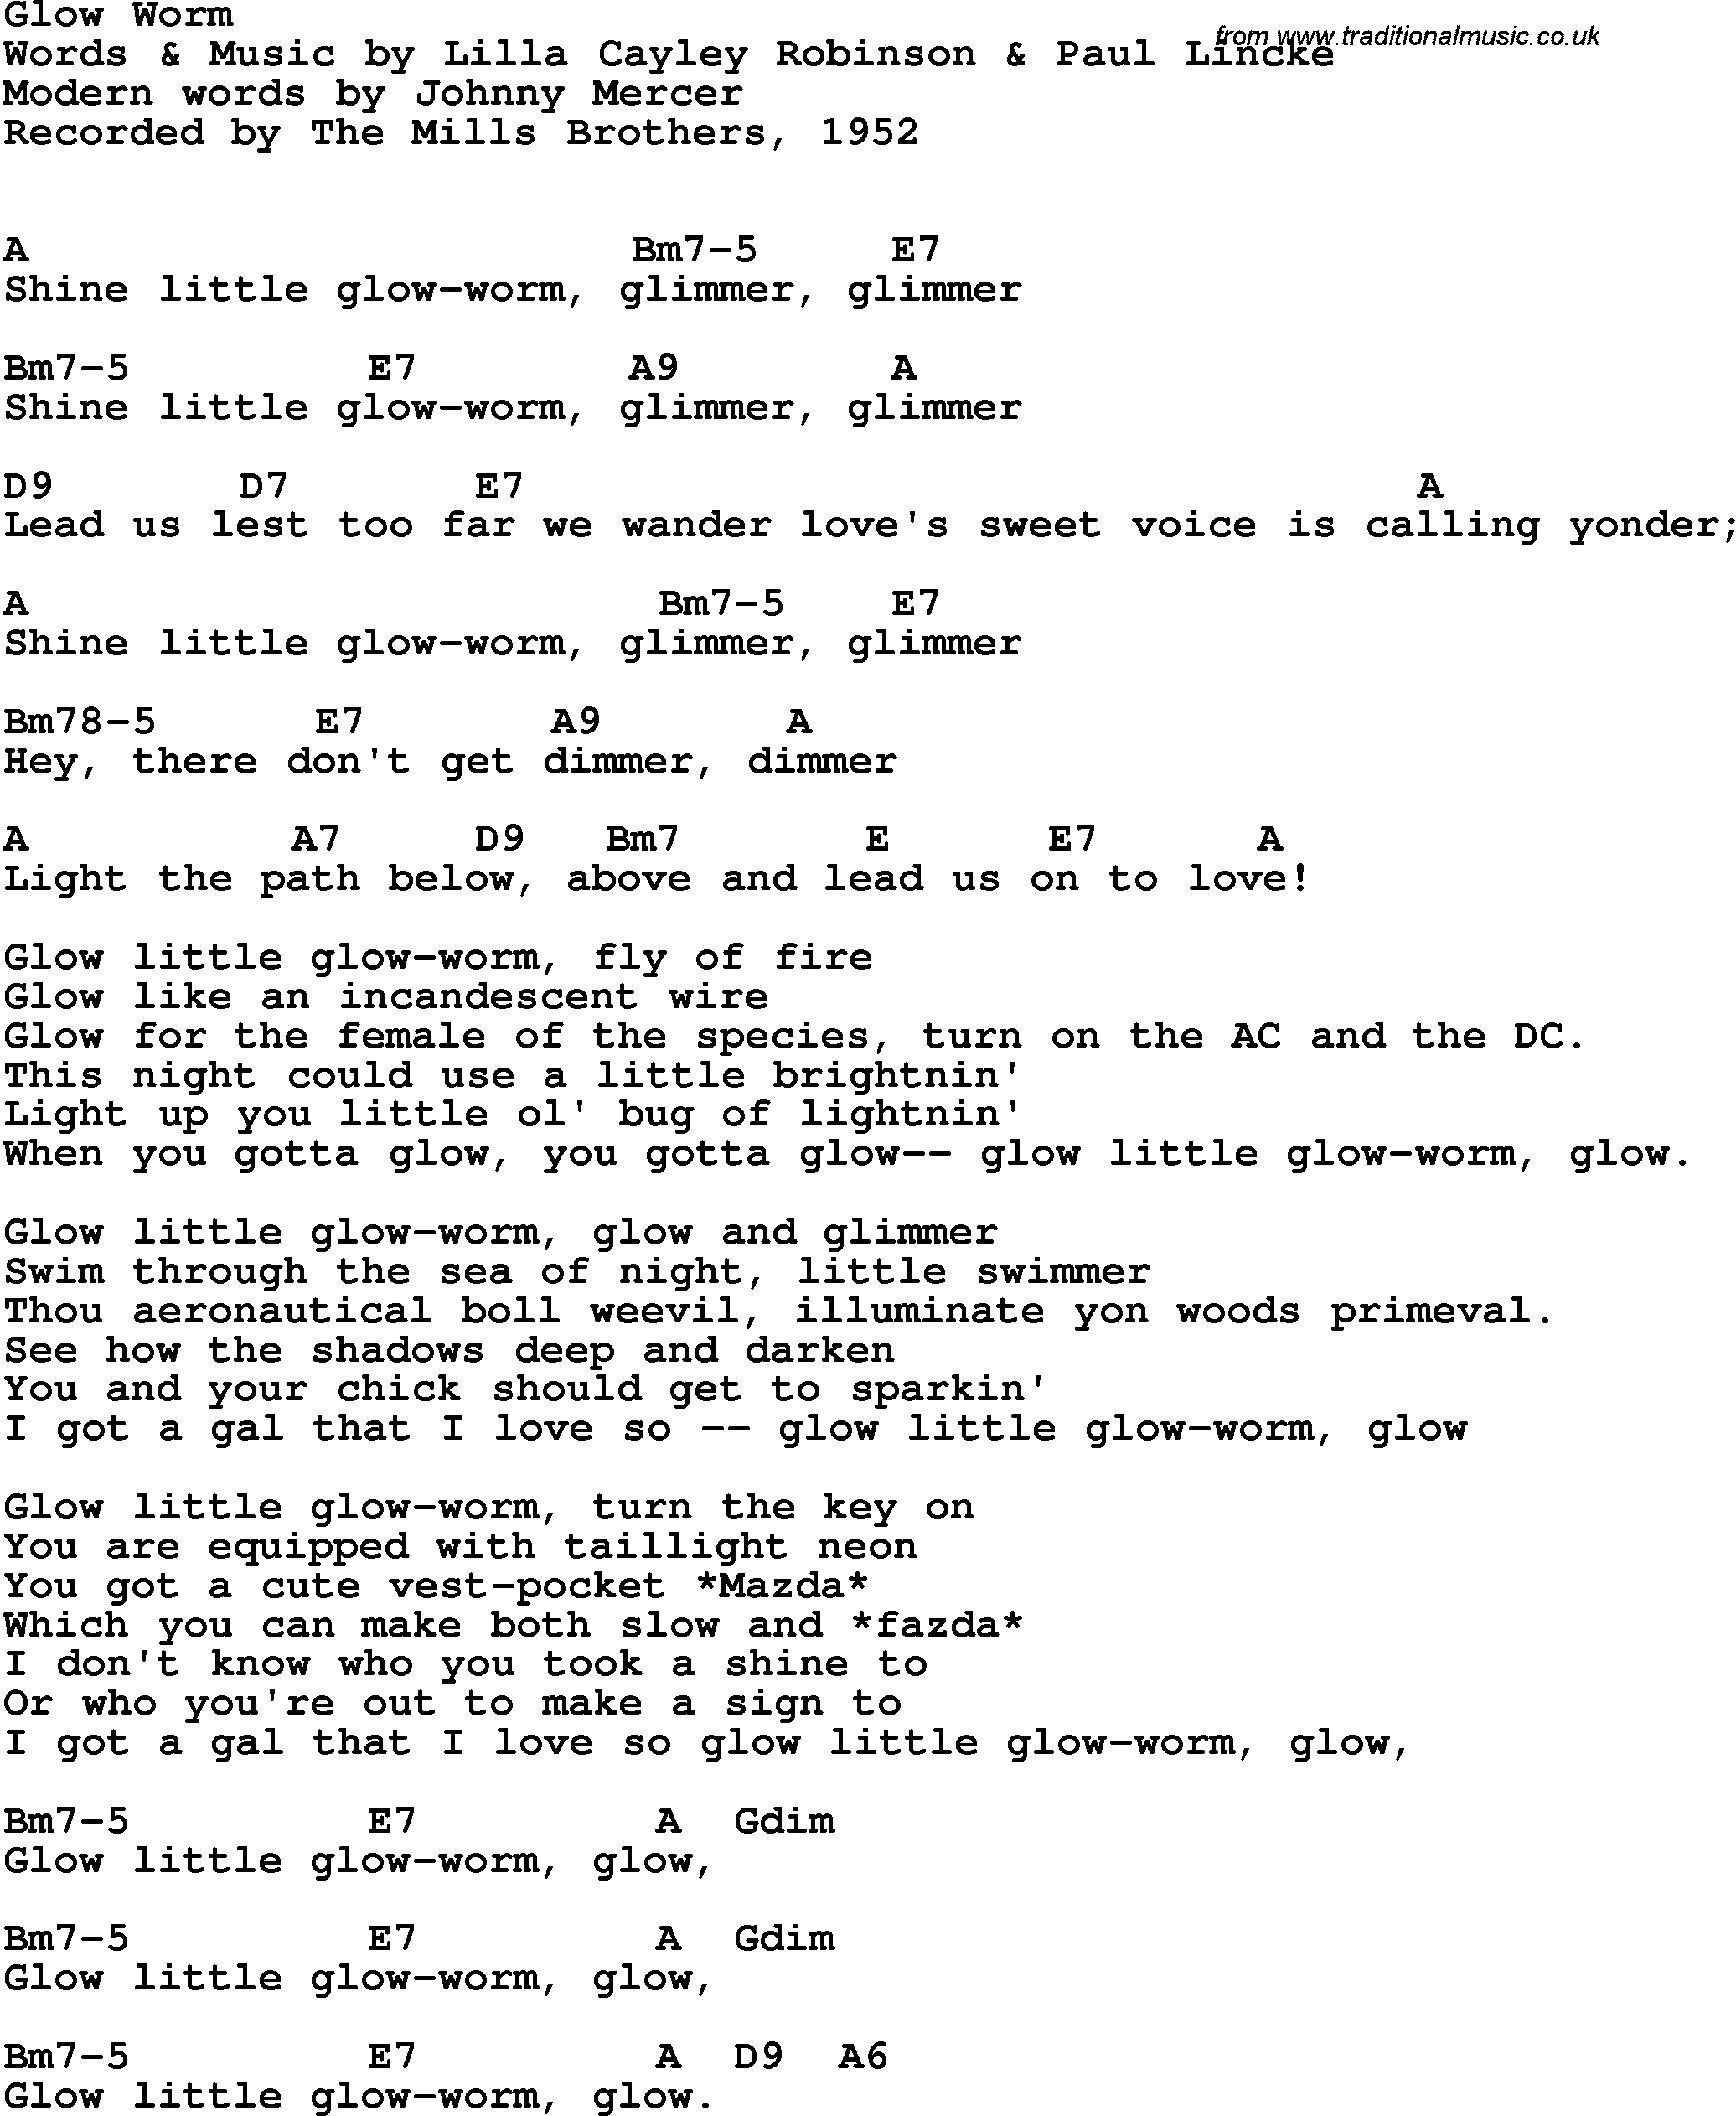 Song Lyrics with guitar chords for Glow Worm - The Mills Brothers, 1952